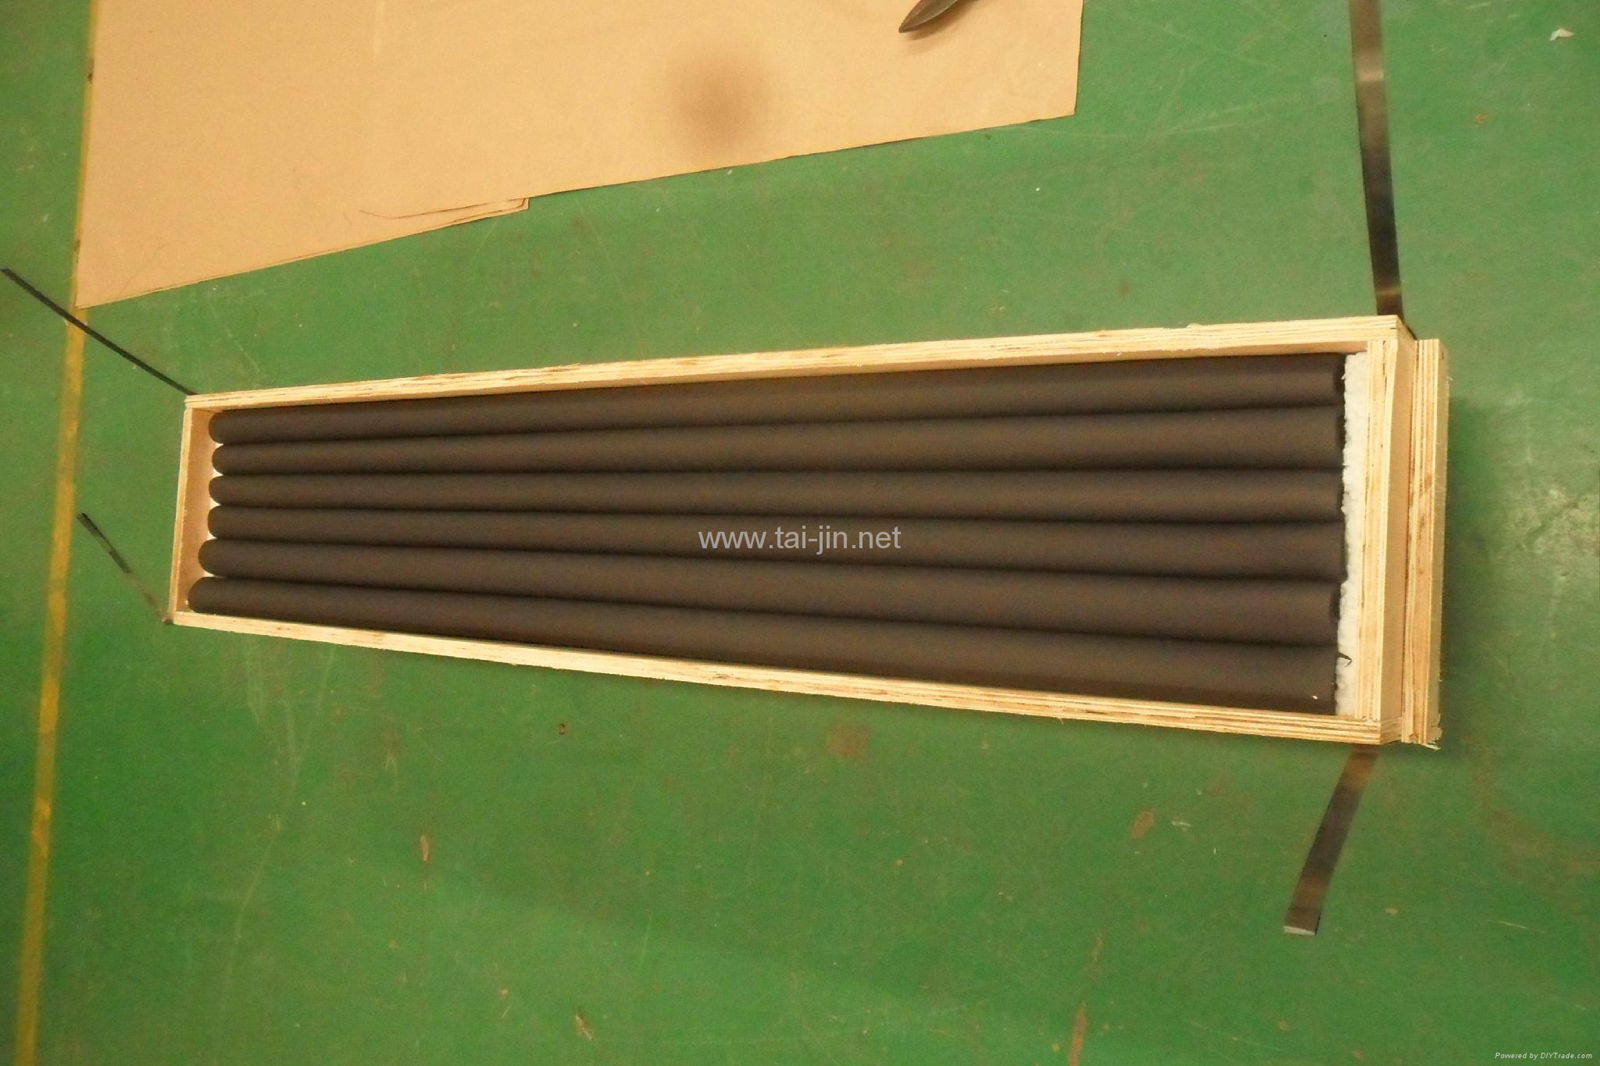 Titanium tubular anode for deep well anode groundbed impressed current CP 5